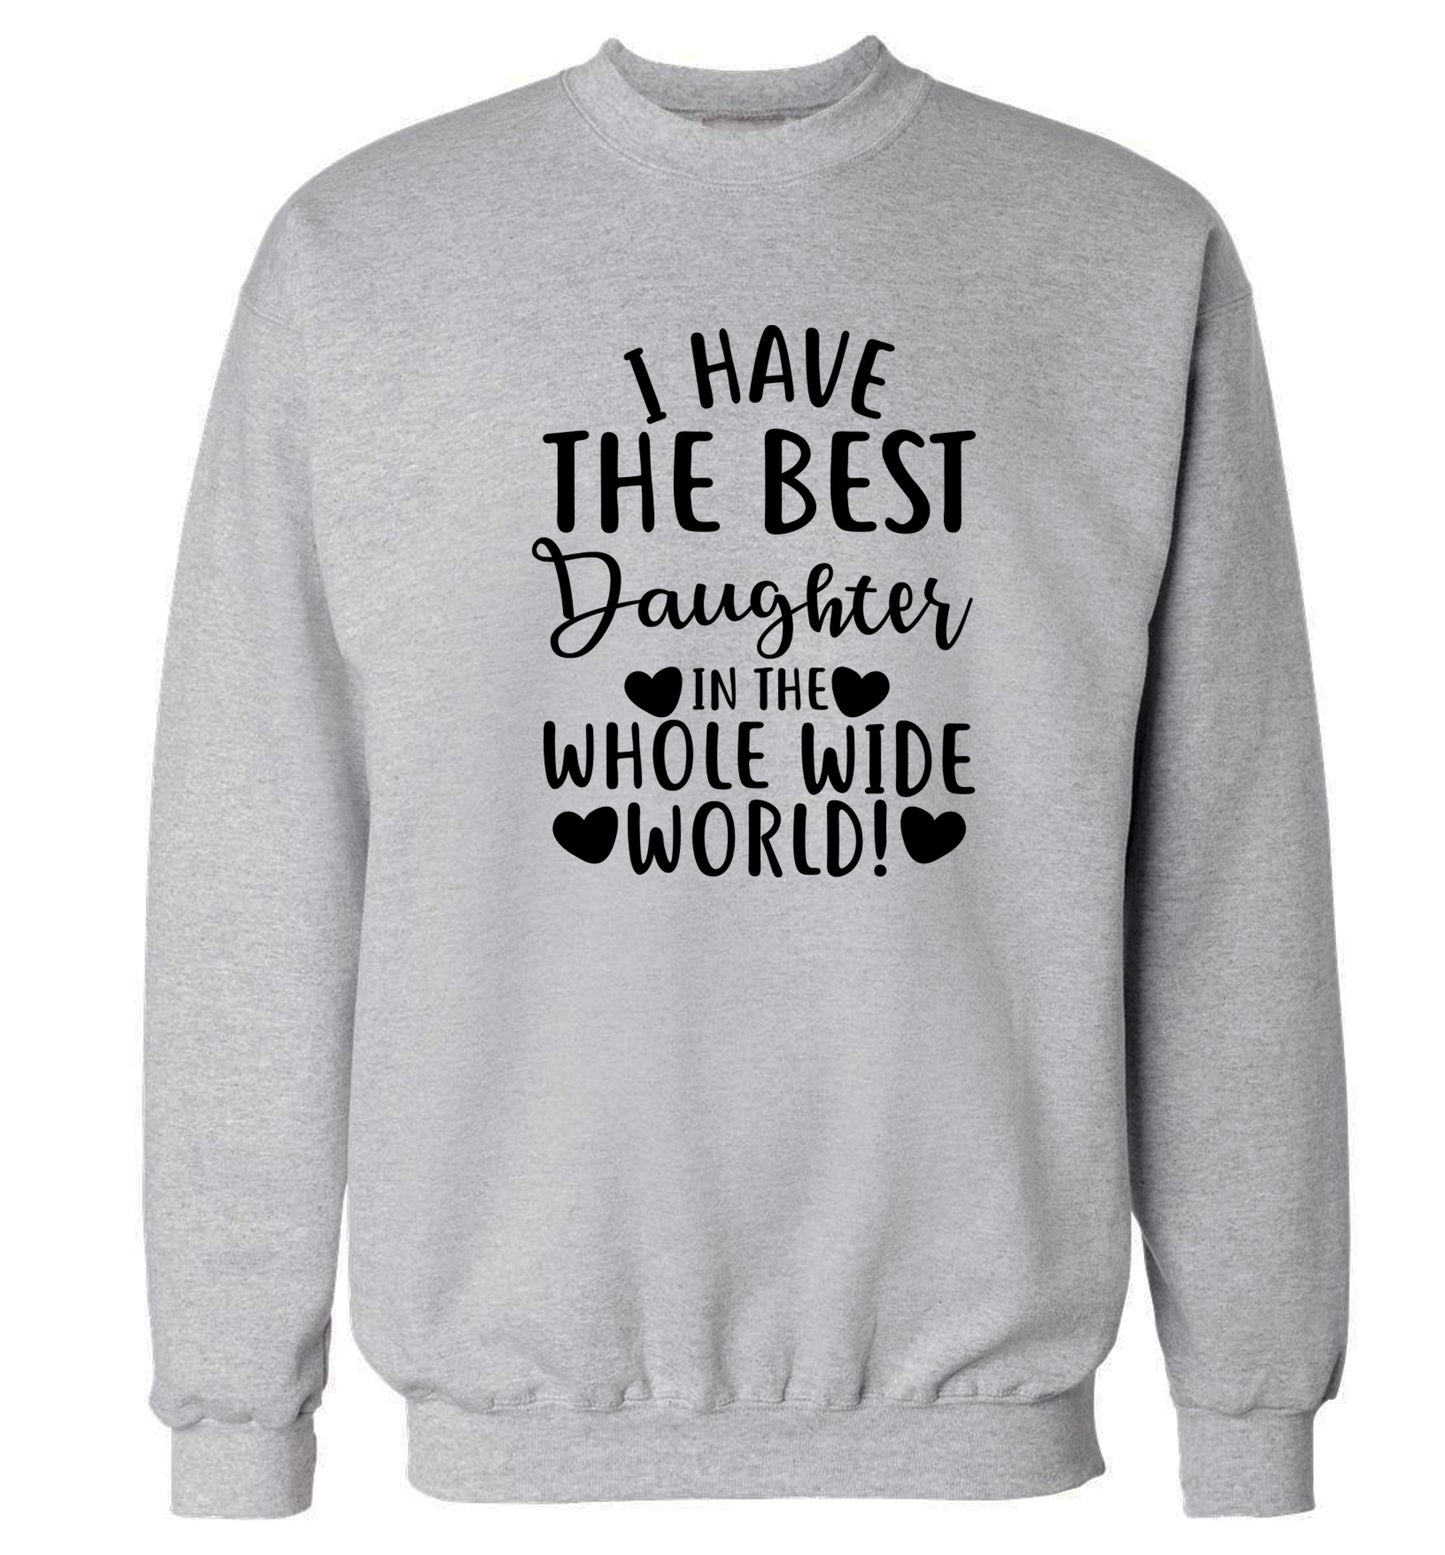 I have the best daughter in the whole wide world! Adult's unisex grey Sweater 2XL